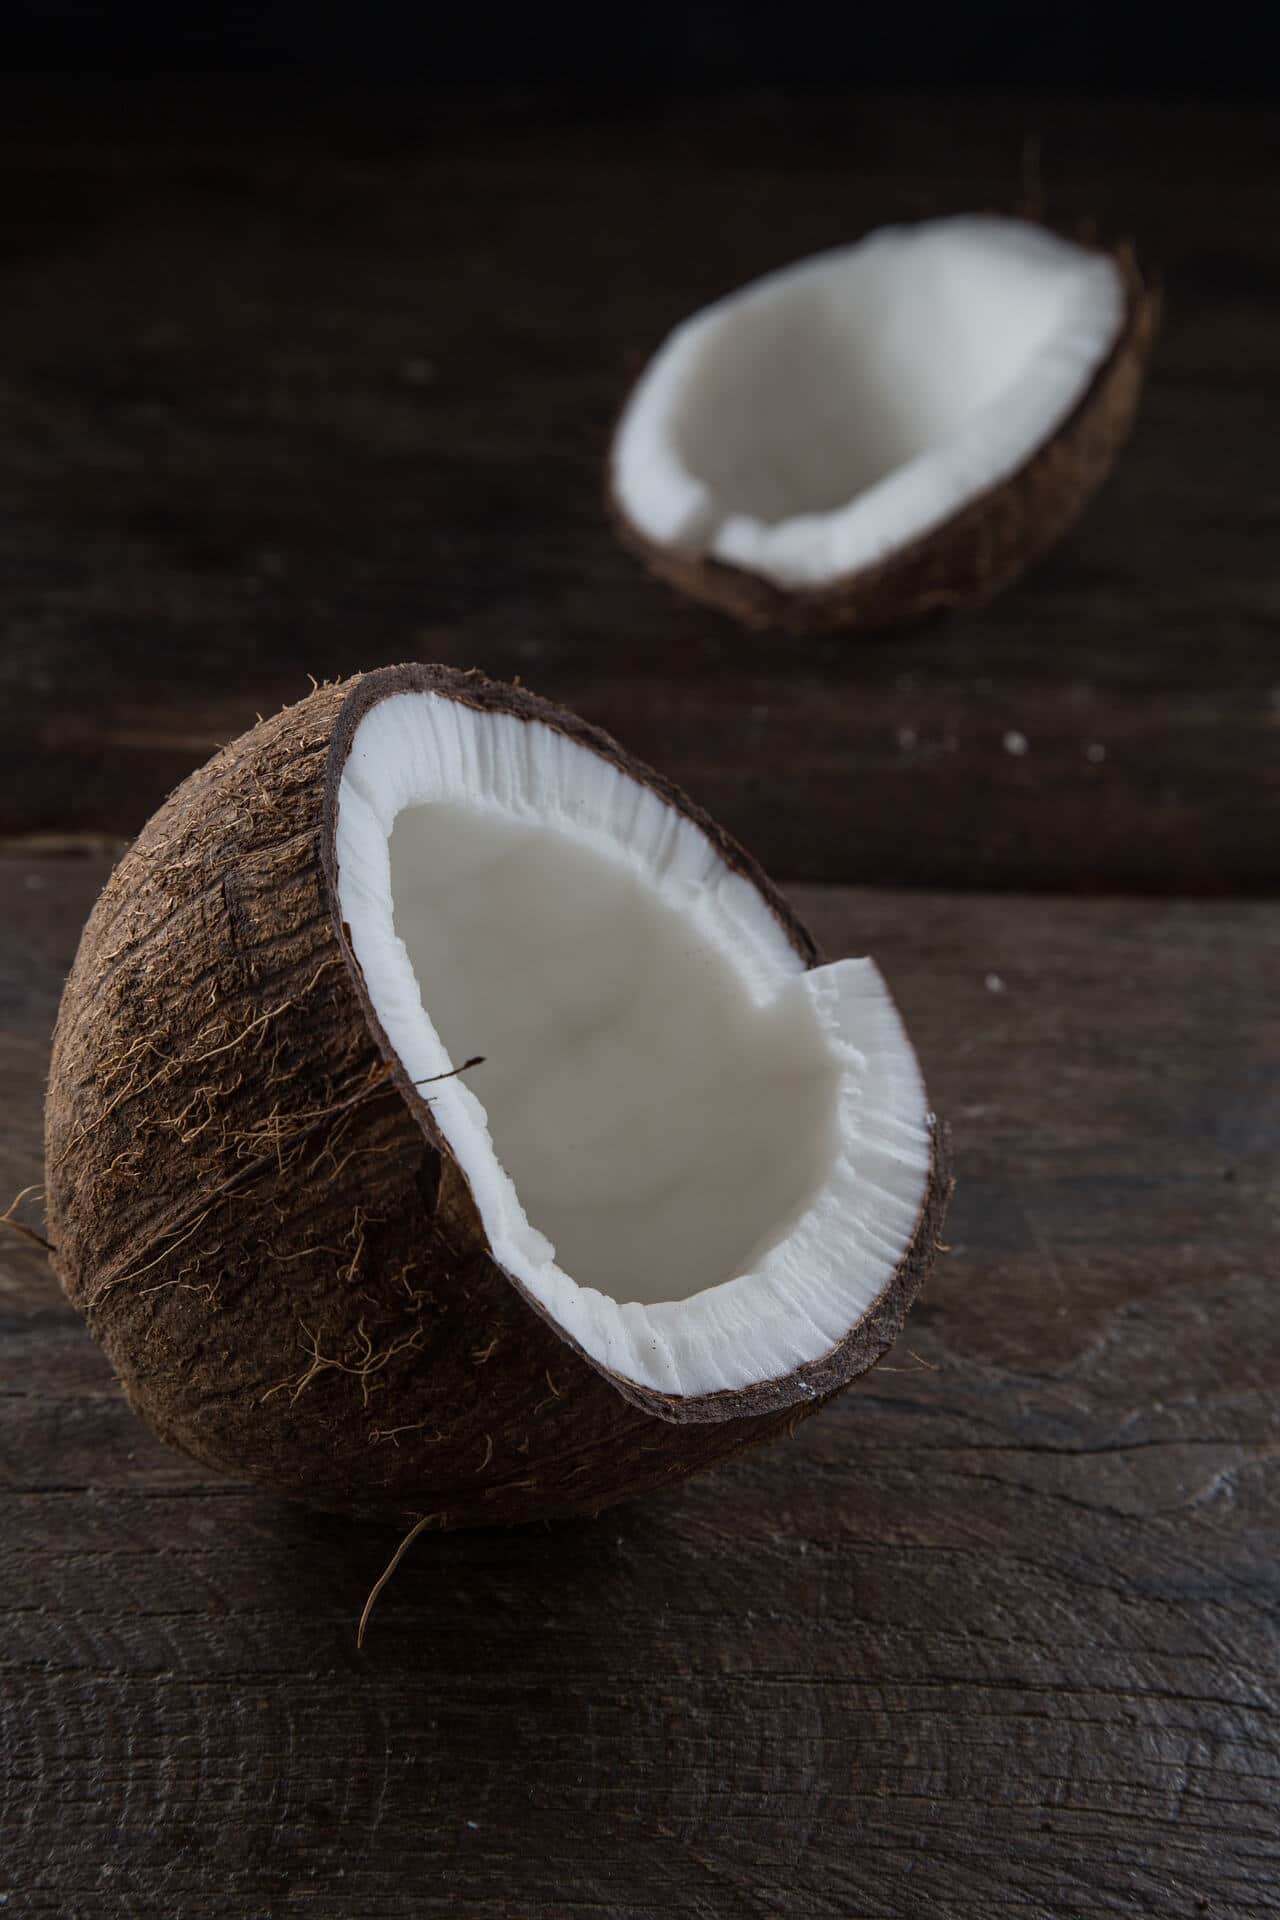 Opened coconuts.